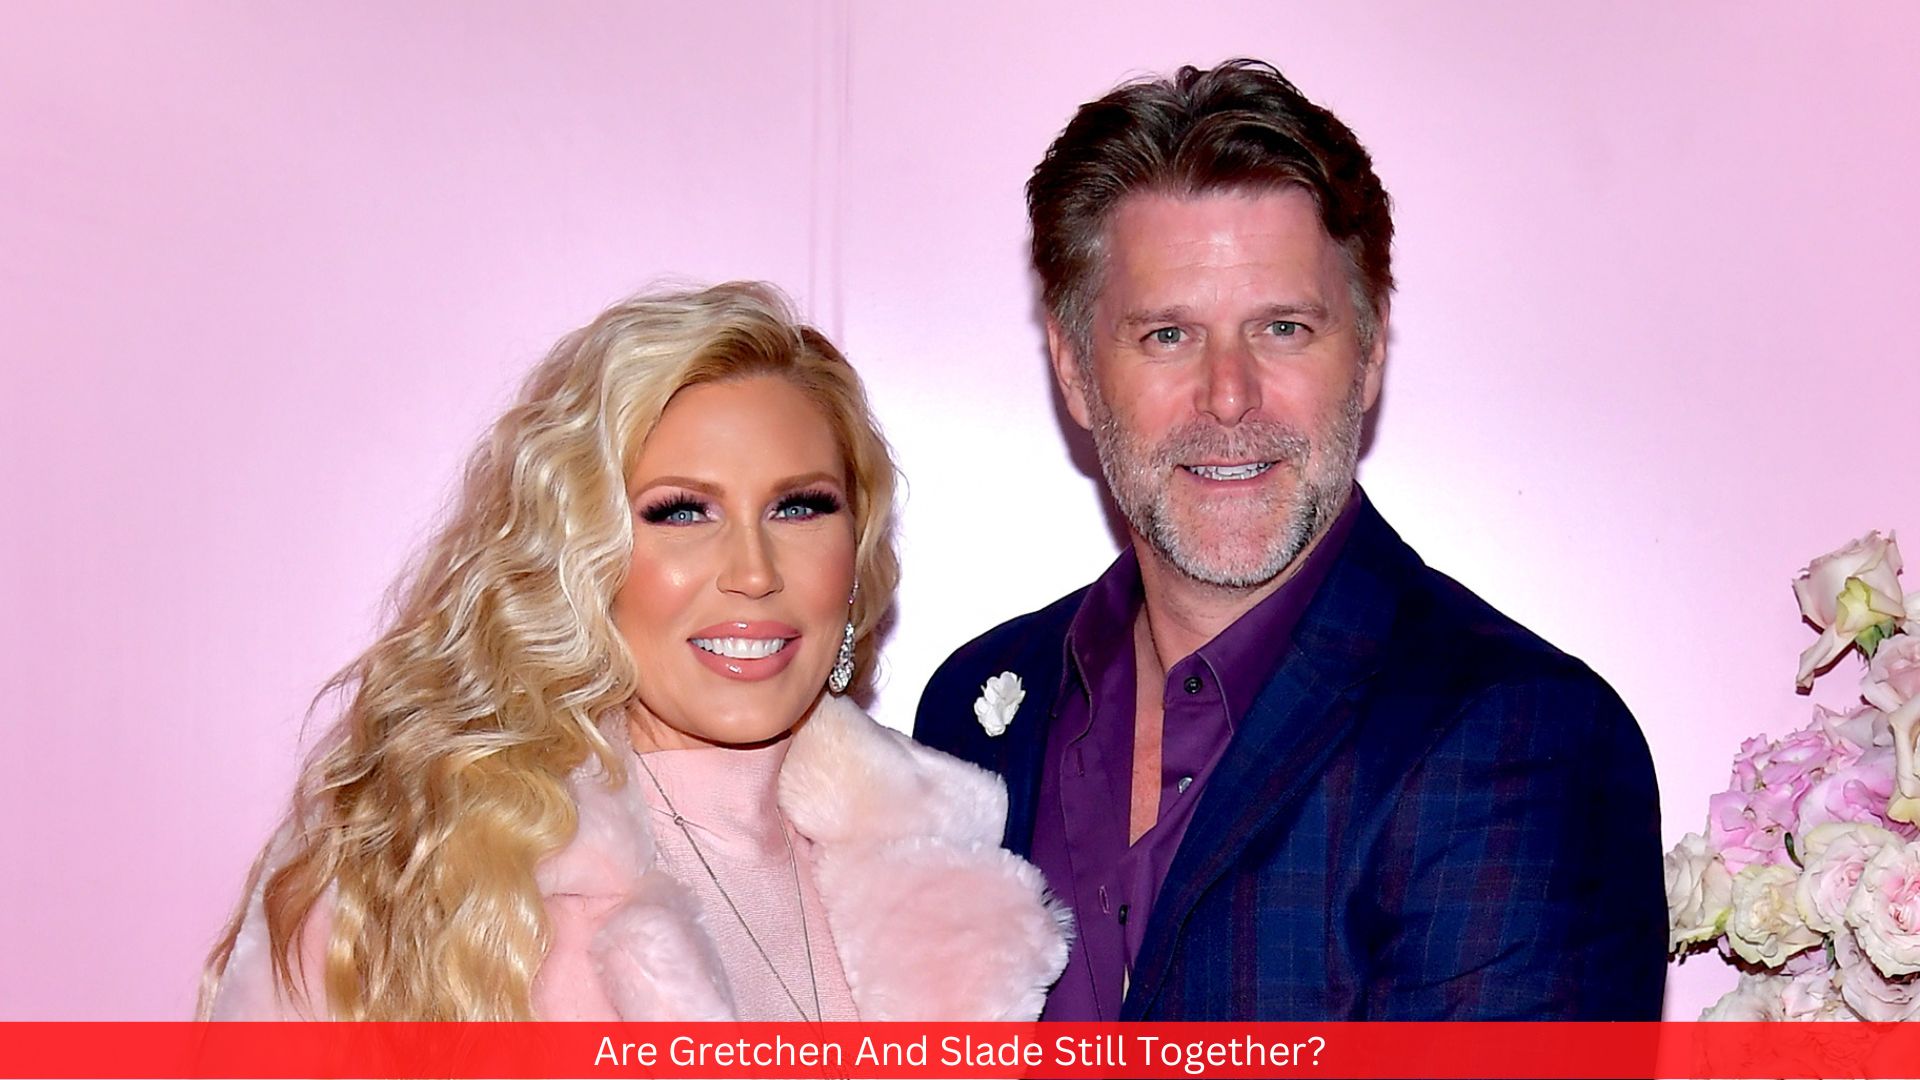 Are Gretchen And Slade Still Together?